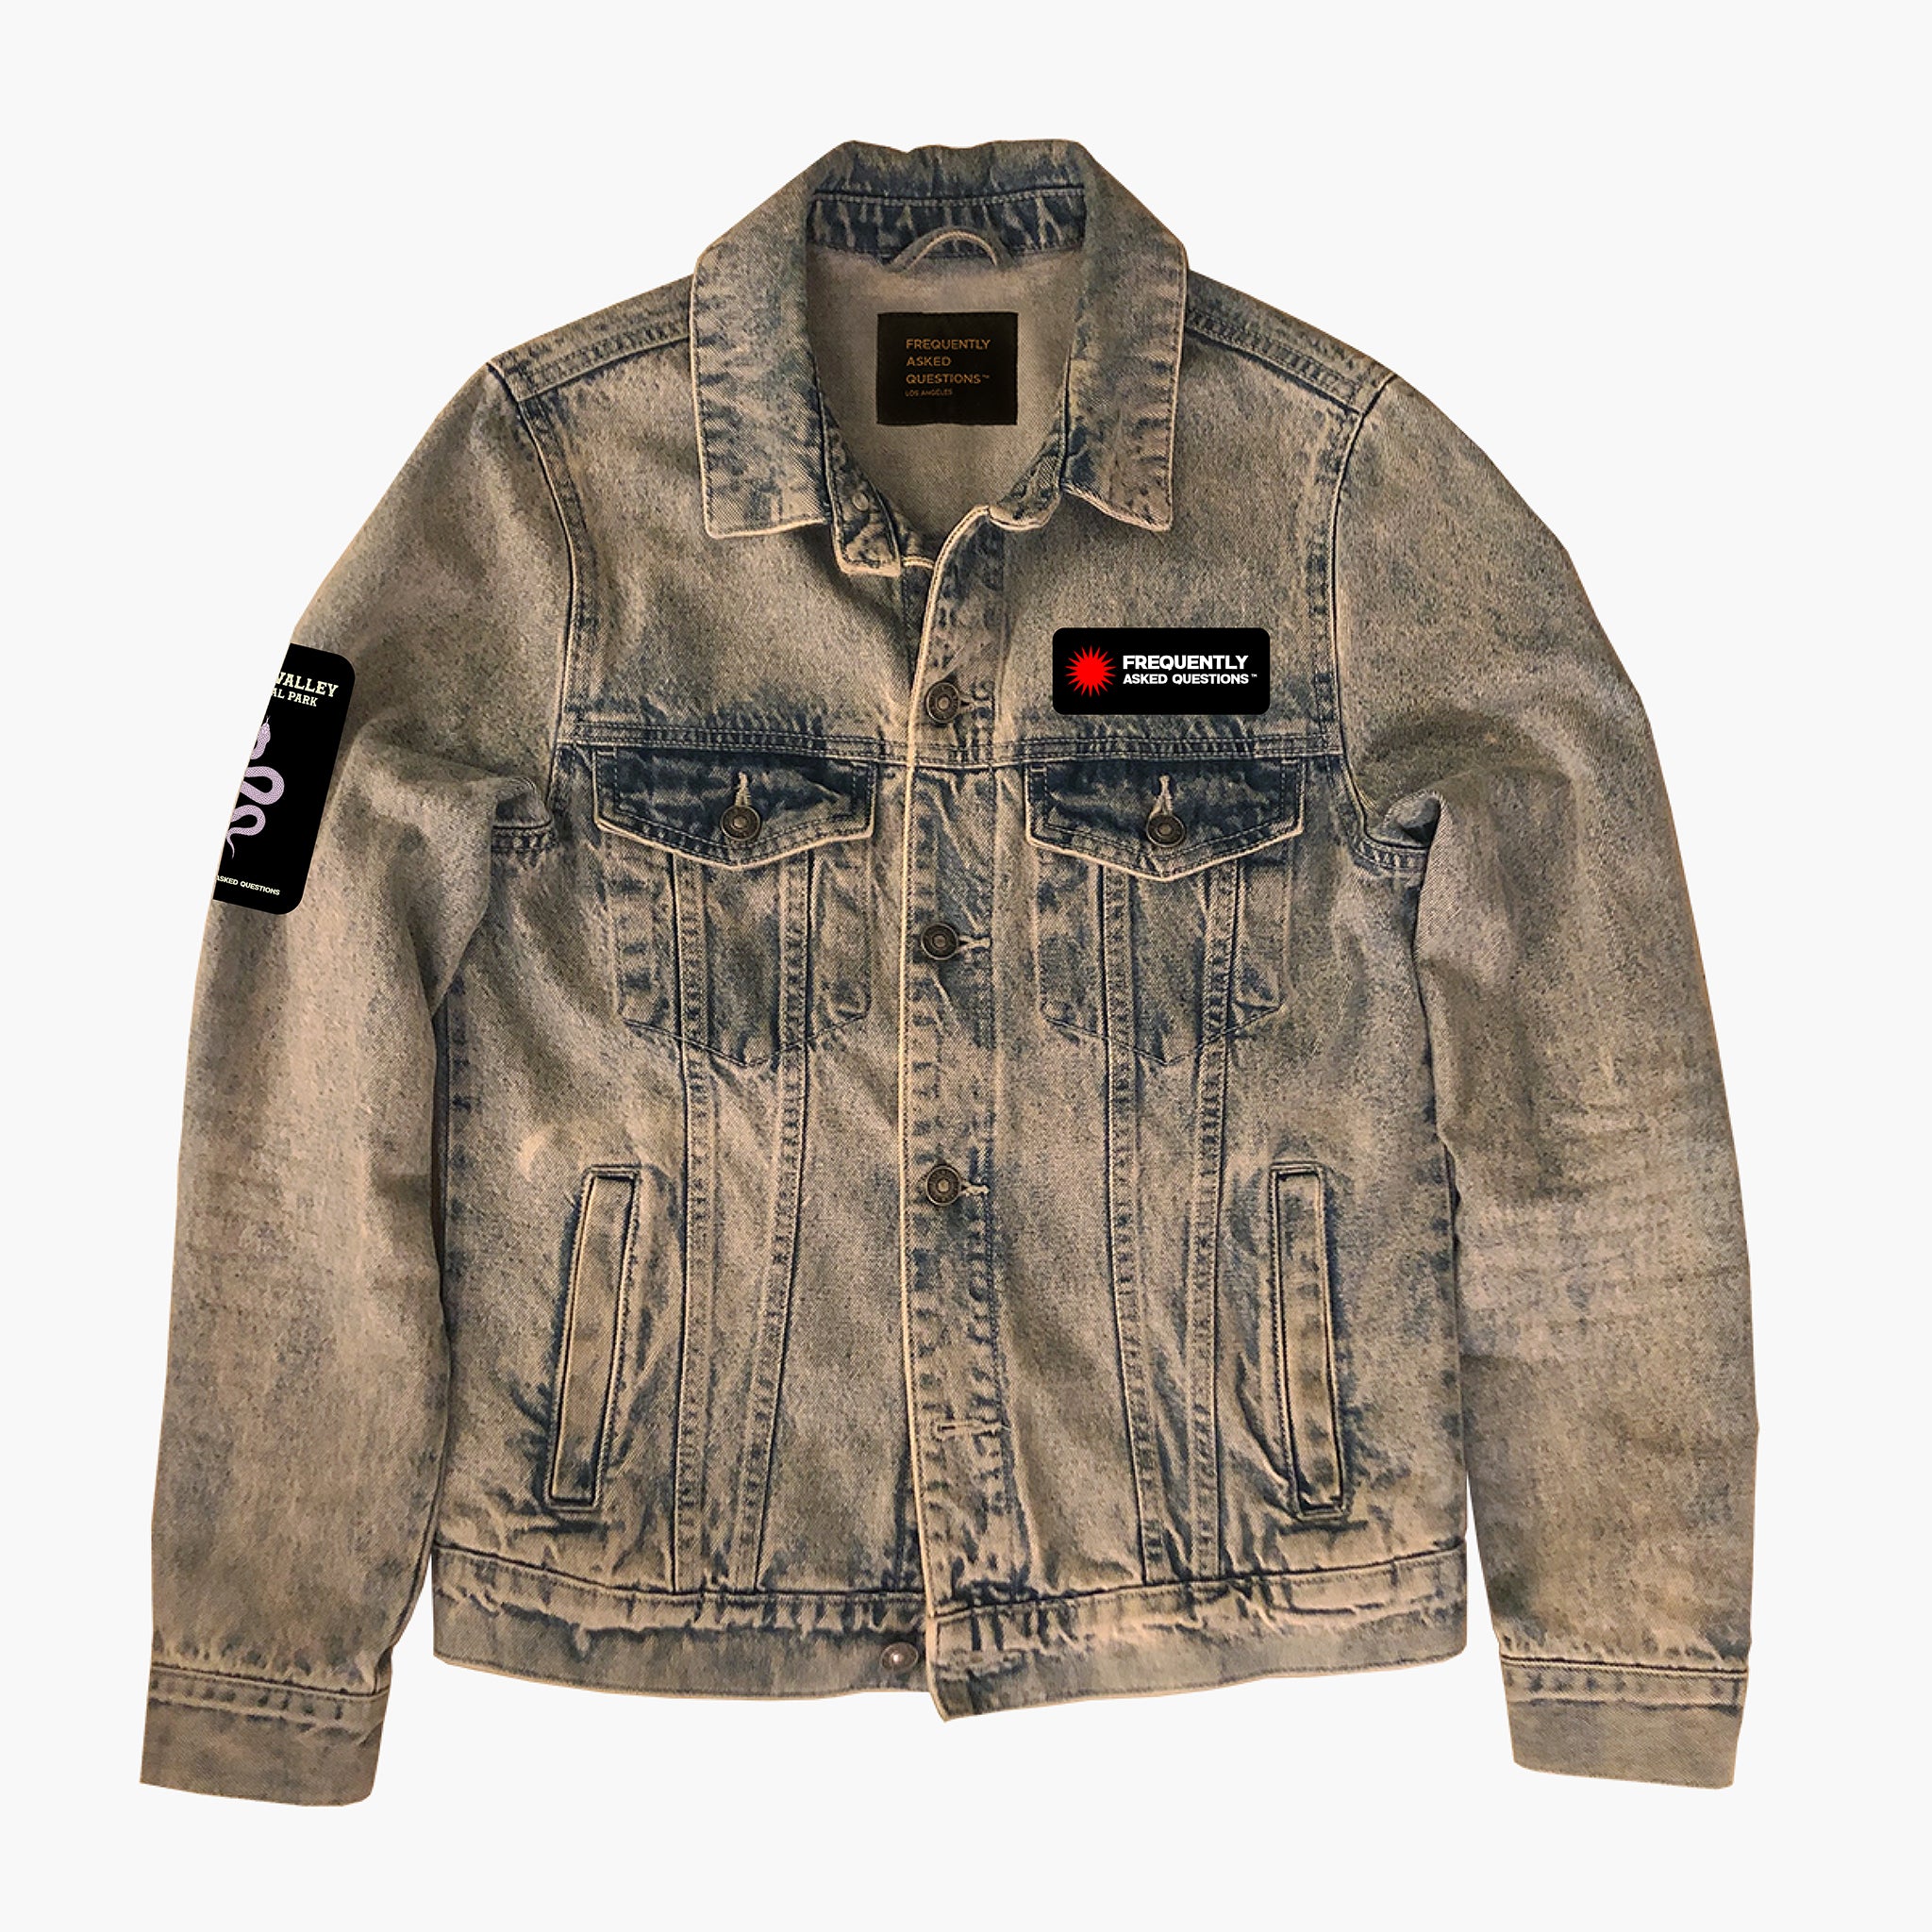 Death Valley Jean Jacket - Frequently Asked Questions